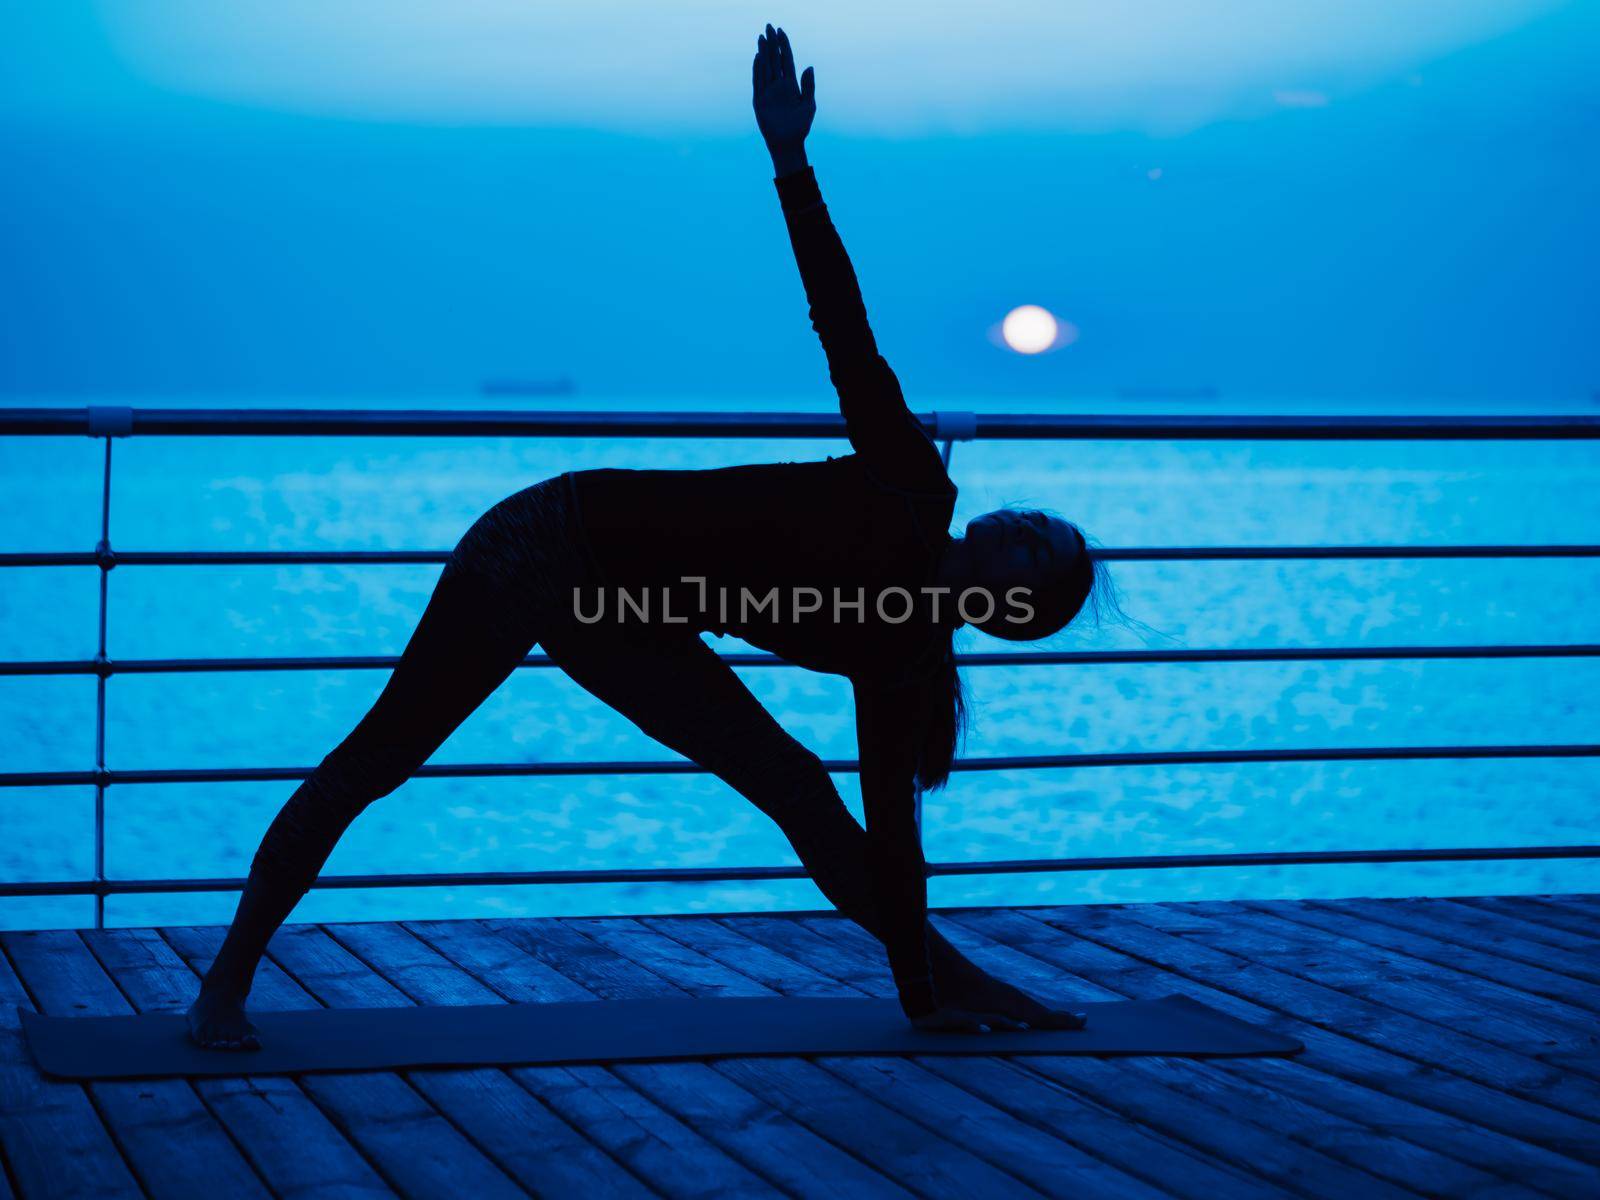 Yoga under full moon over night ocean or sea beach. Young woman's meditation during practice. by kristina_kokhanova